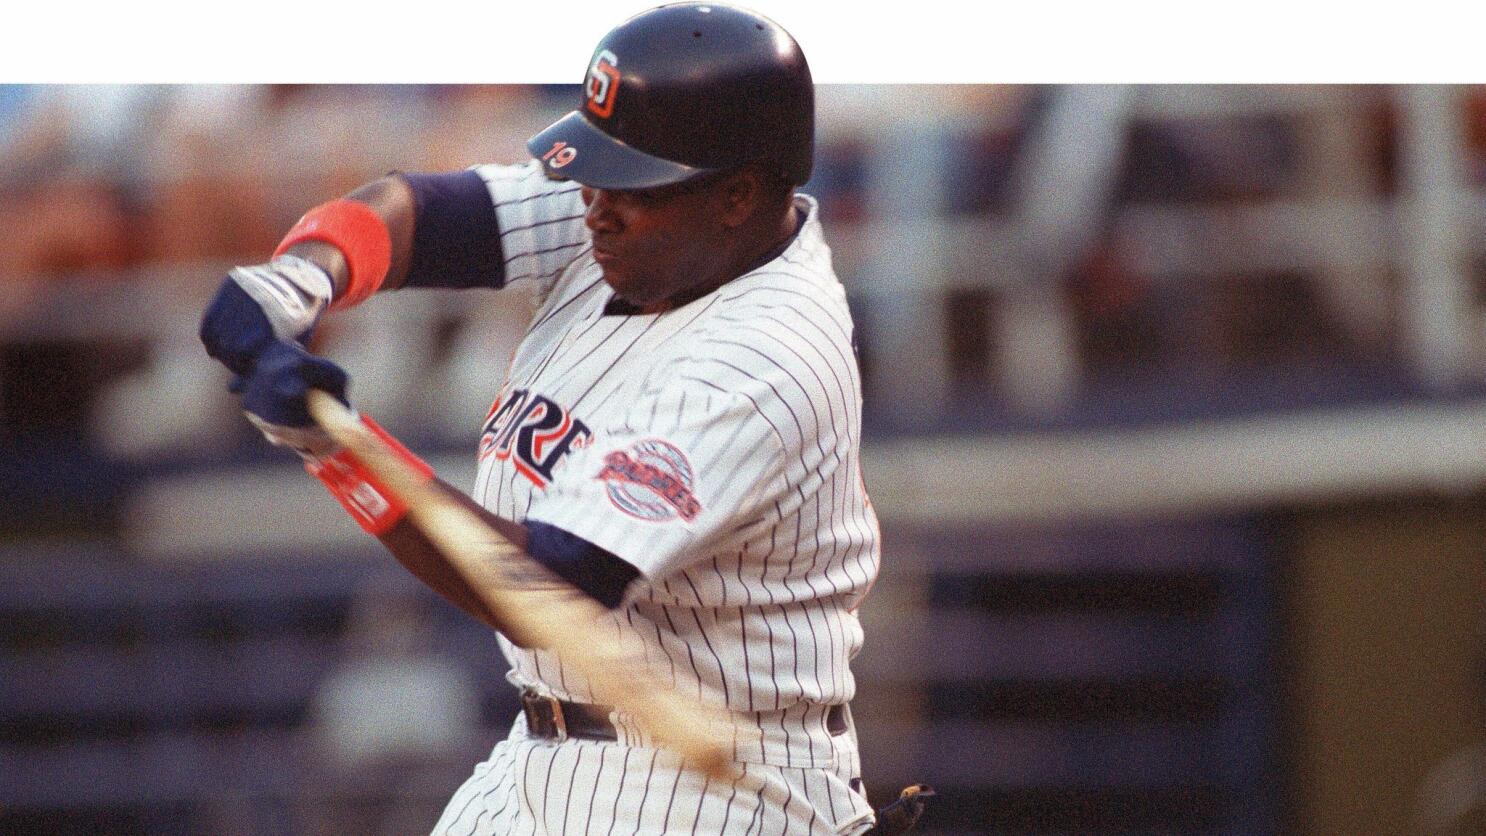 394 — It's been 25 years since strike wiped out Gwynn's chance to hit .400  - The San Diego Union-Tribune